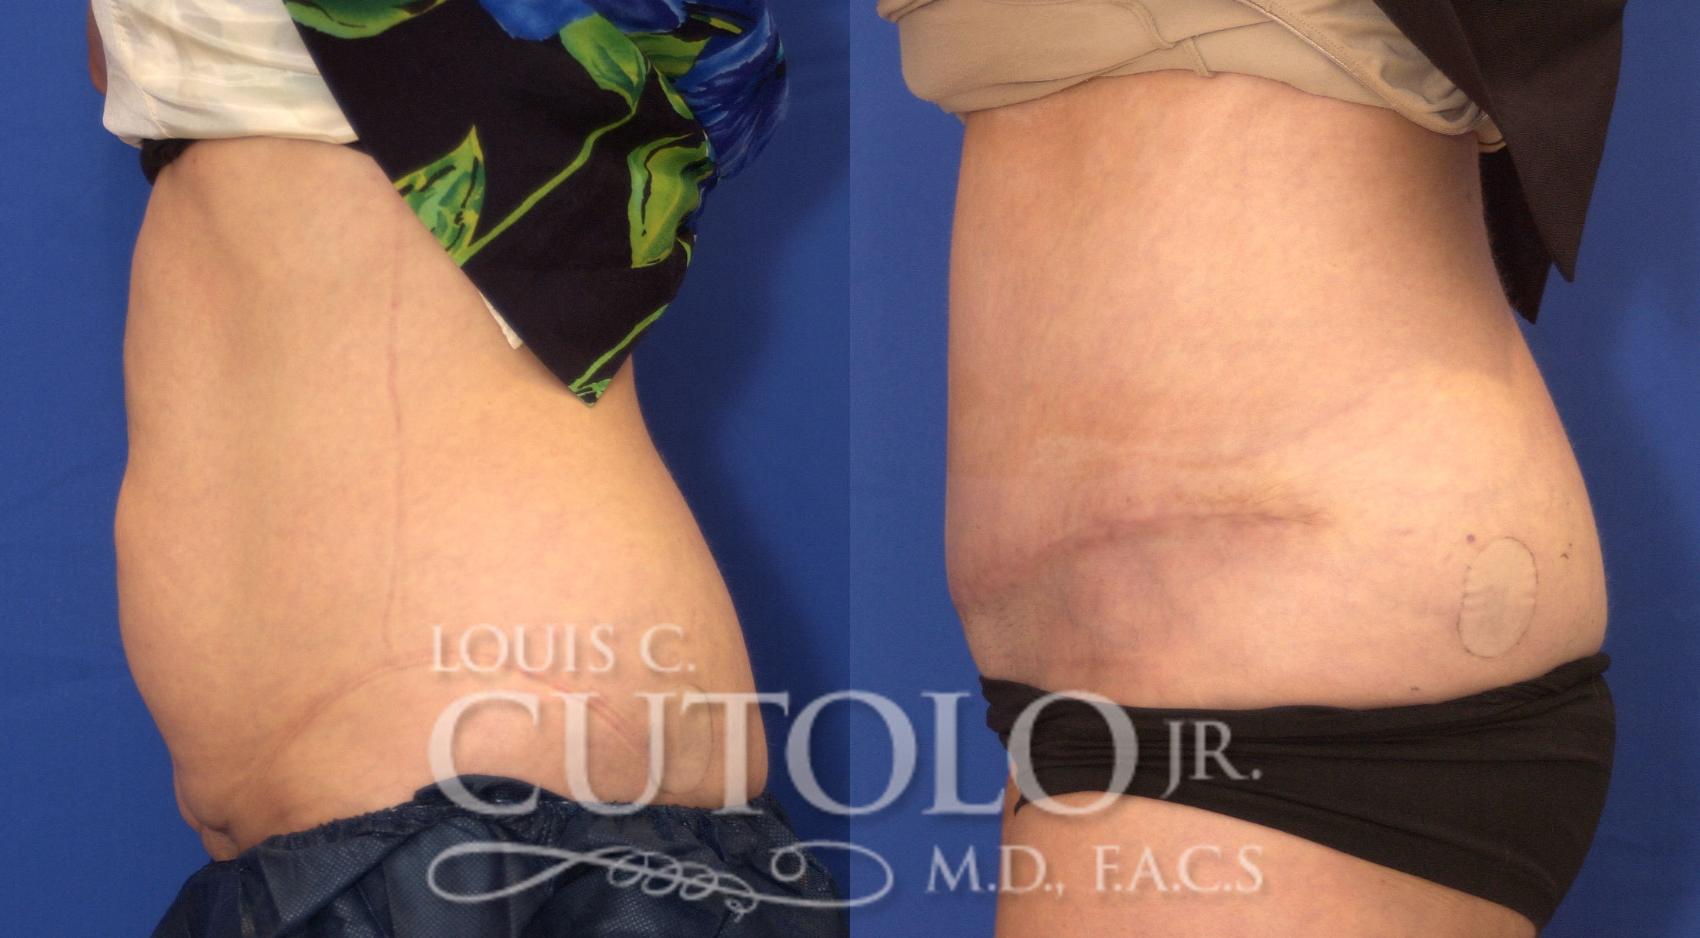 tummy tuck scars after 5 years